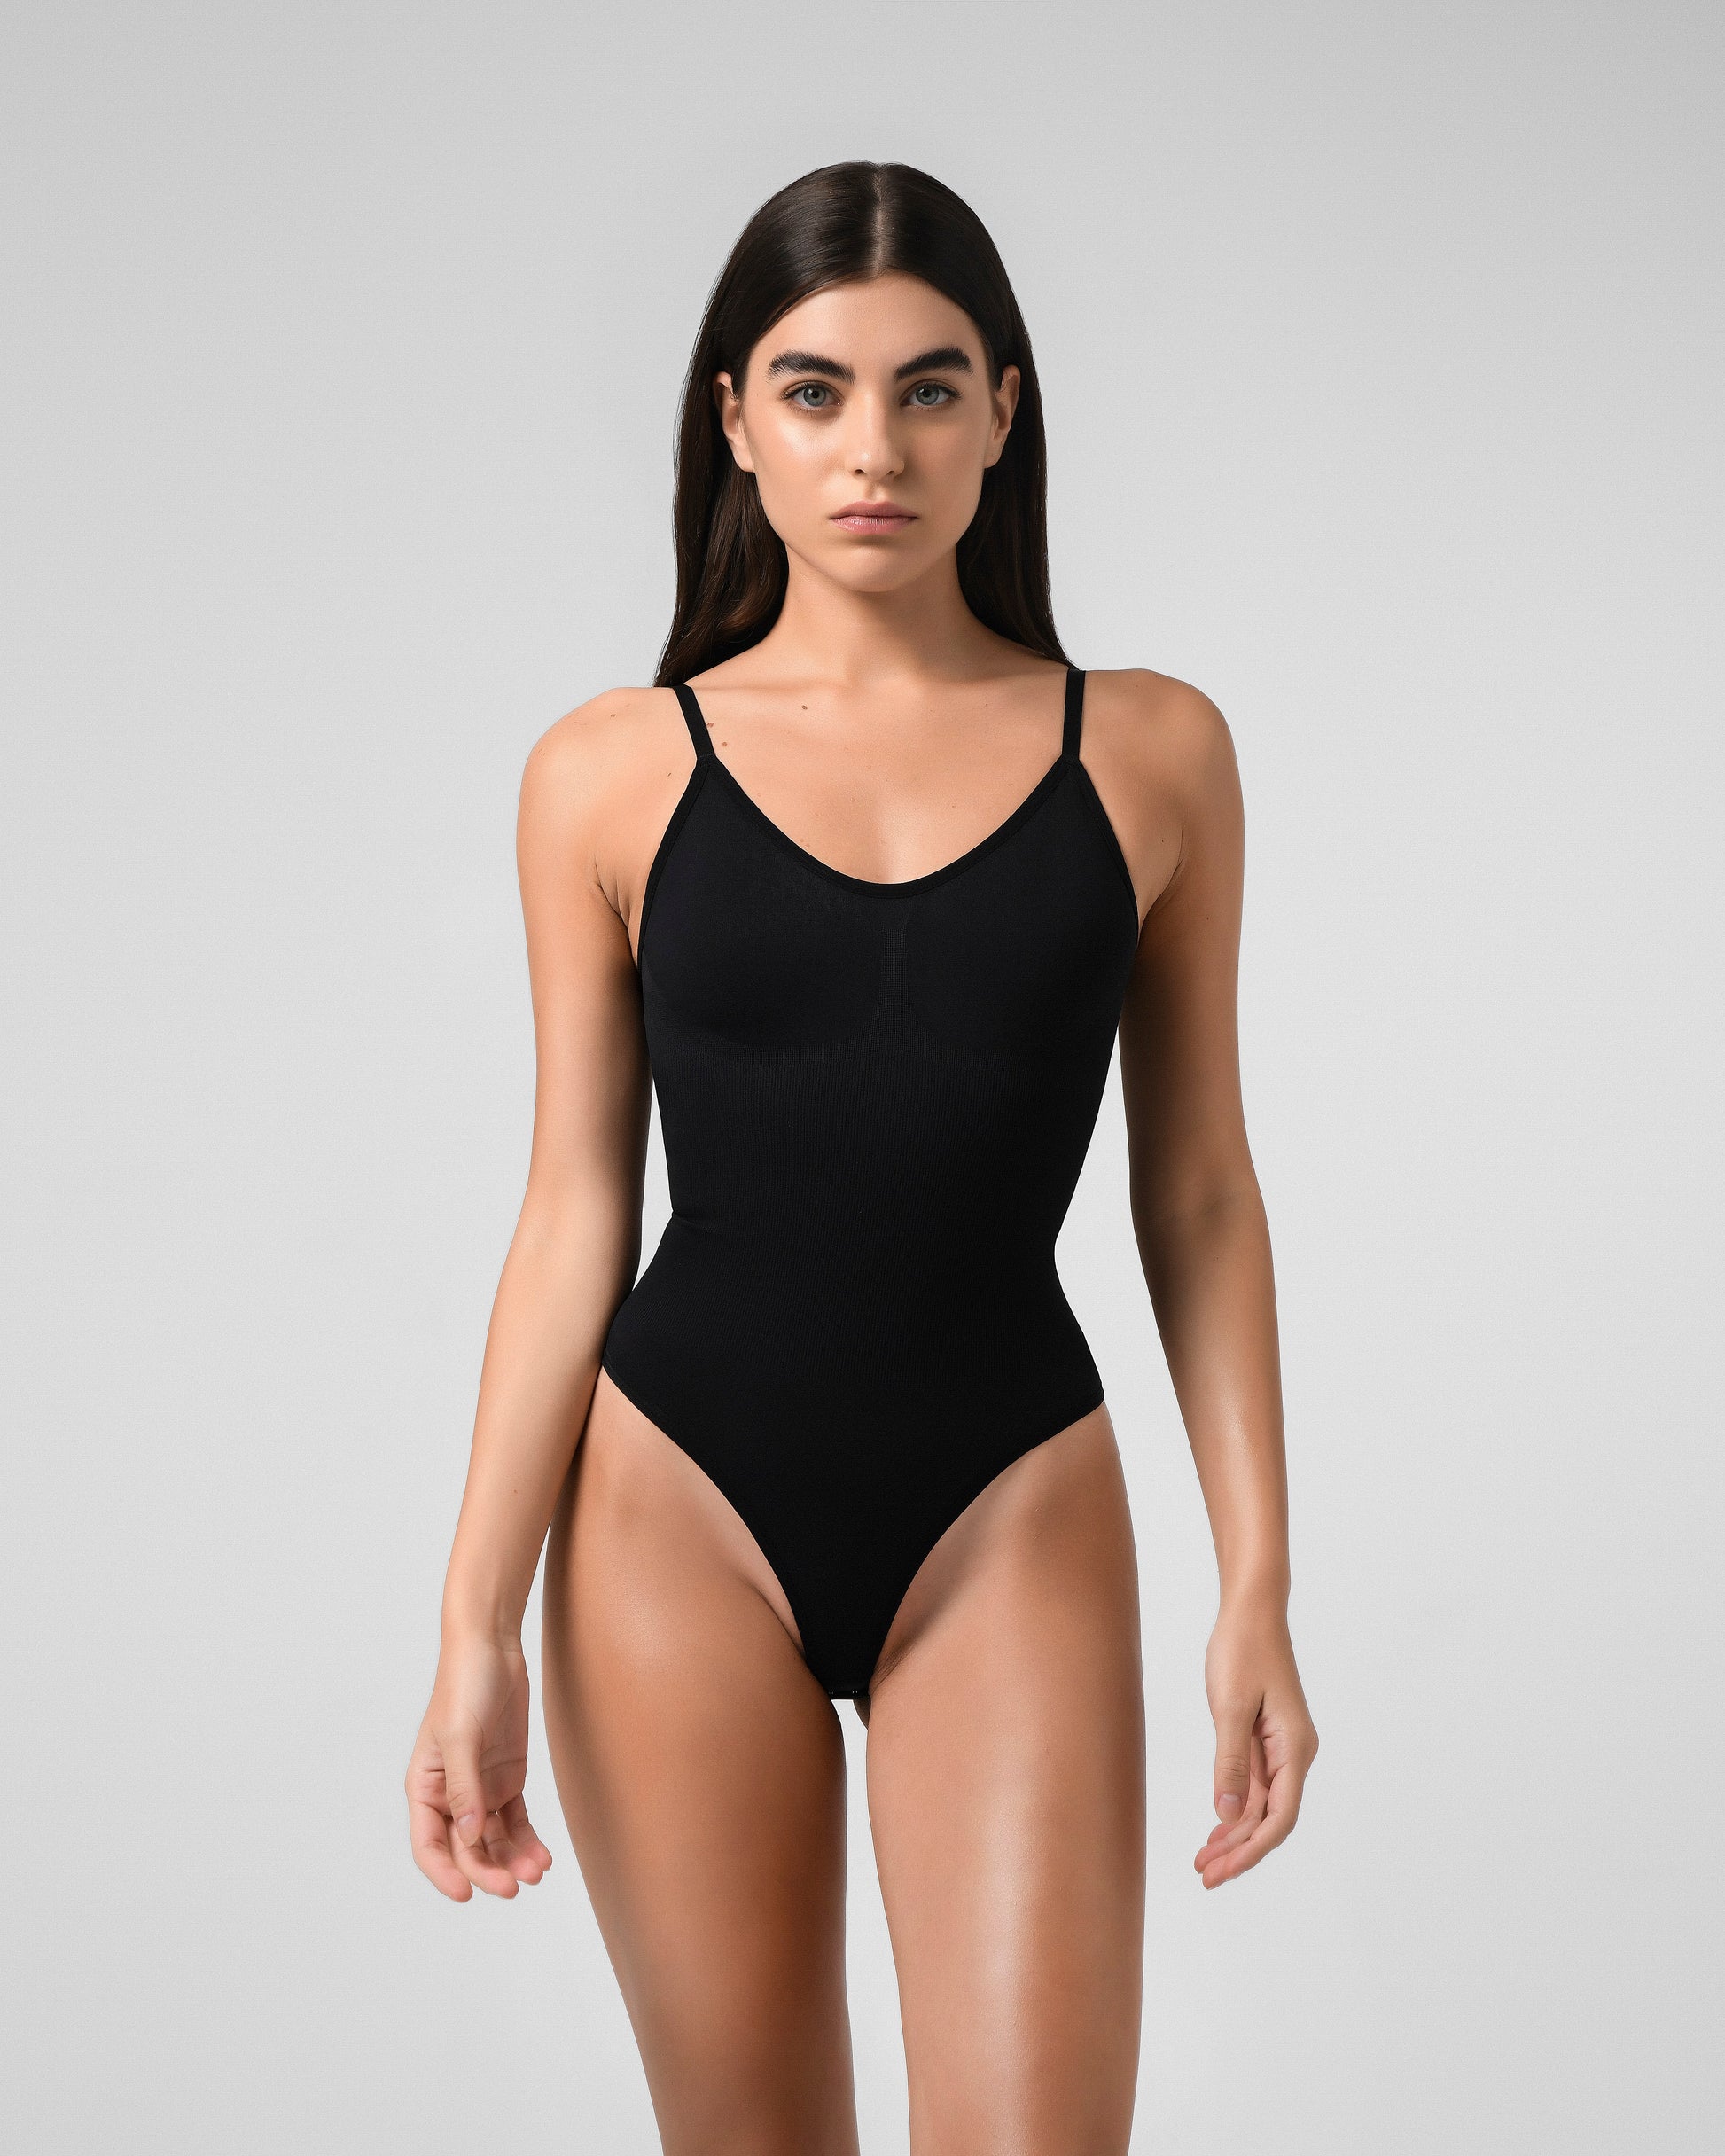 I love my PloppyDolly bodysuit…breathing in for me so I don't have to